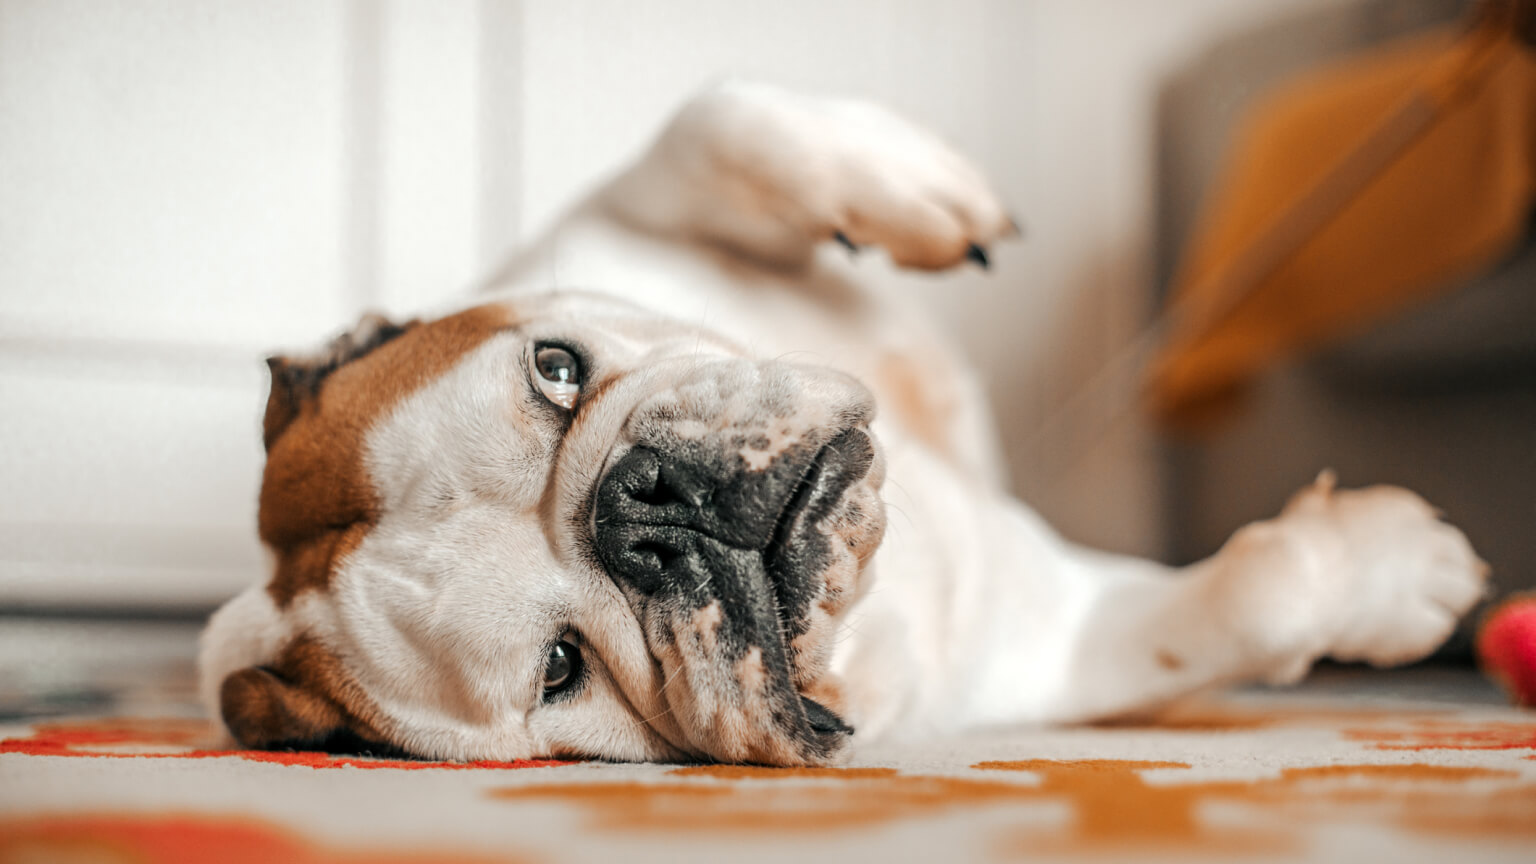 How to Get Dog Pee and Other Pet Waste Out of Carpet | MYMOVE